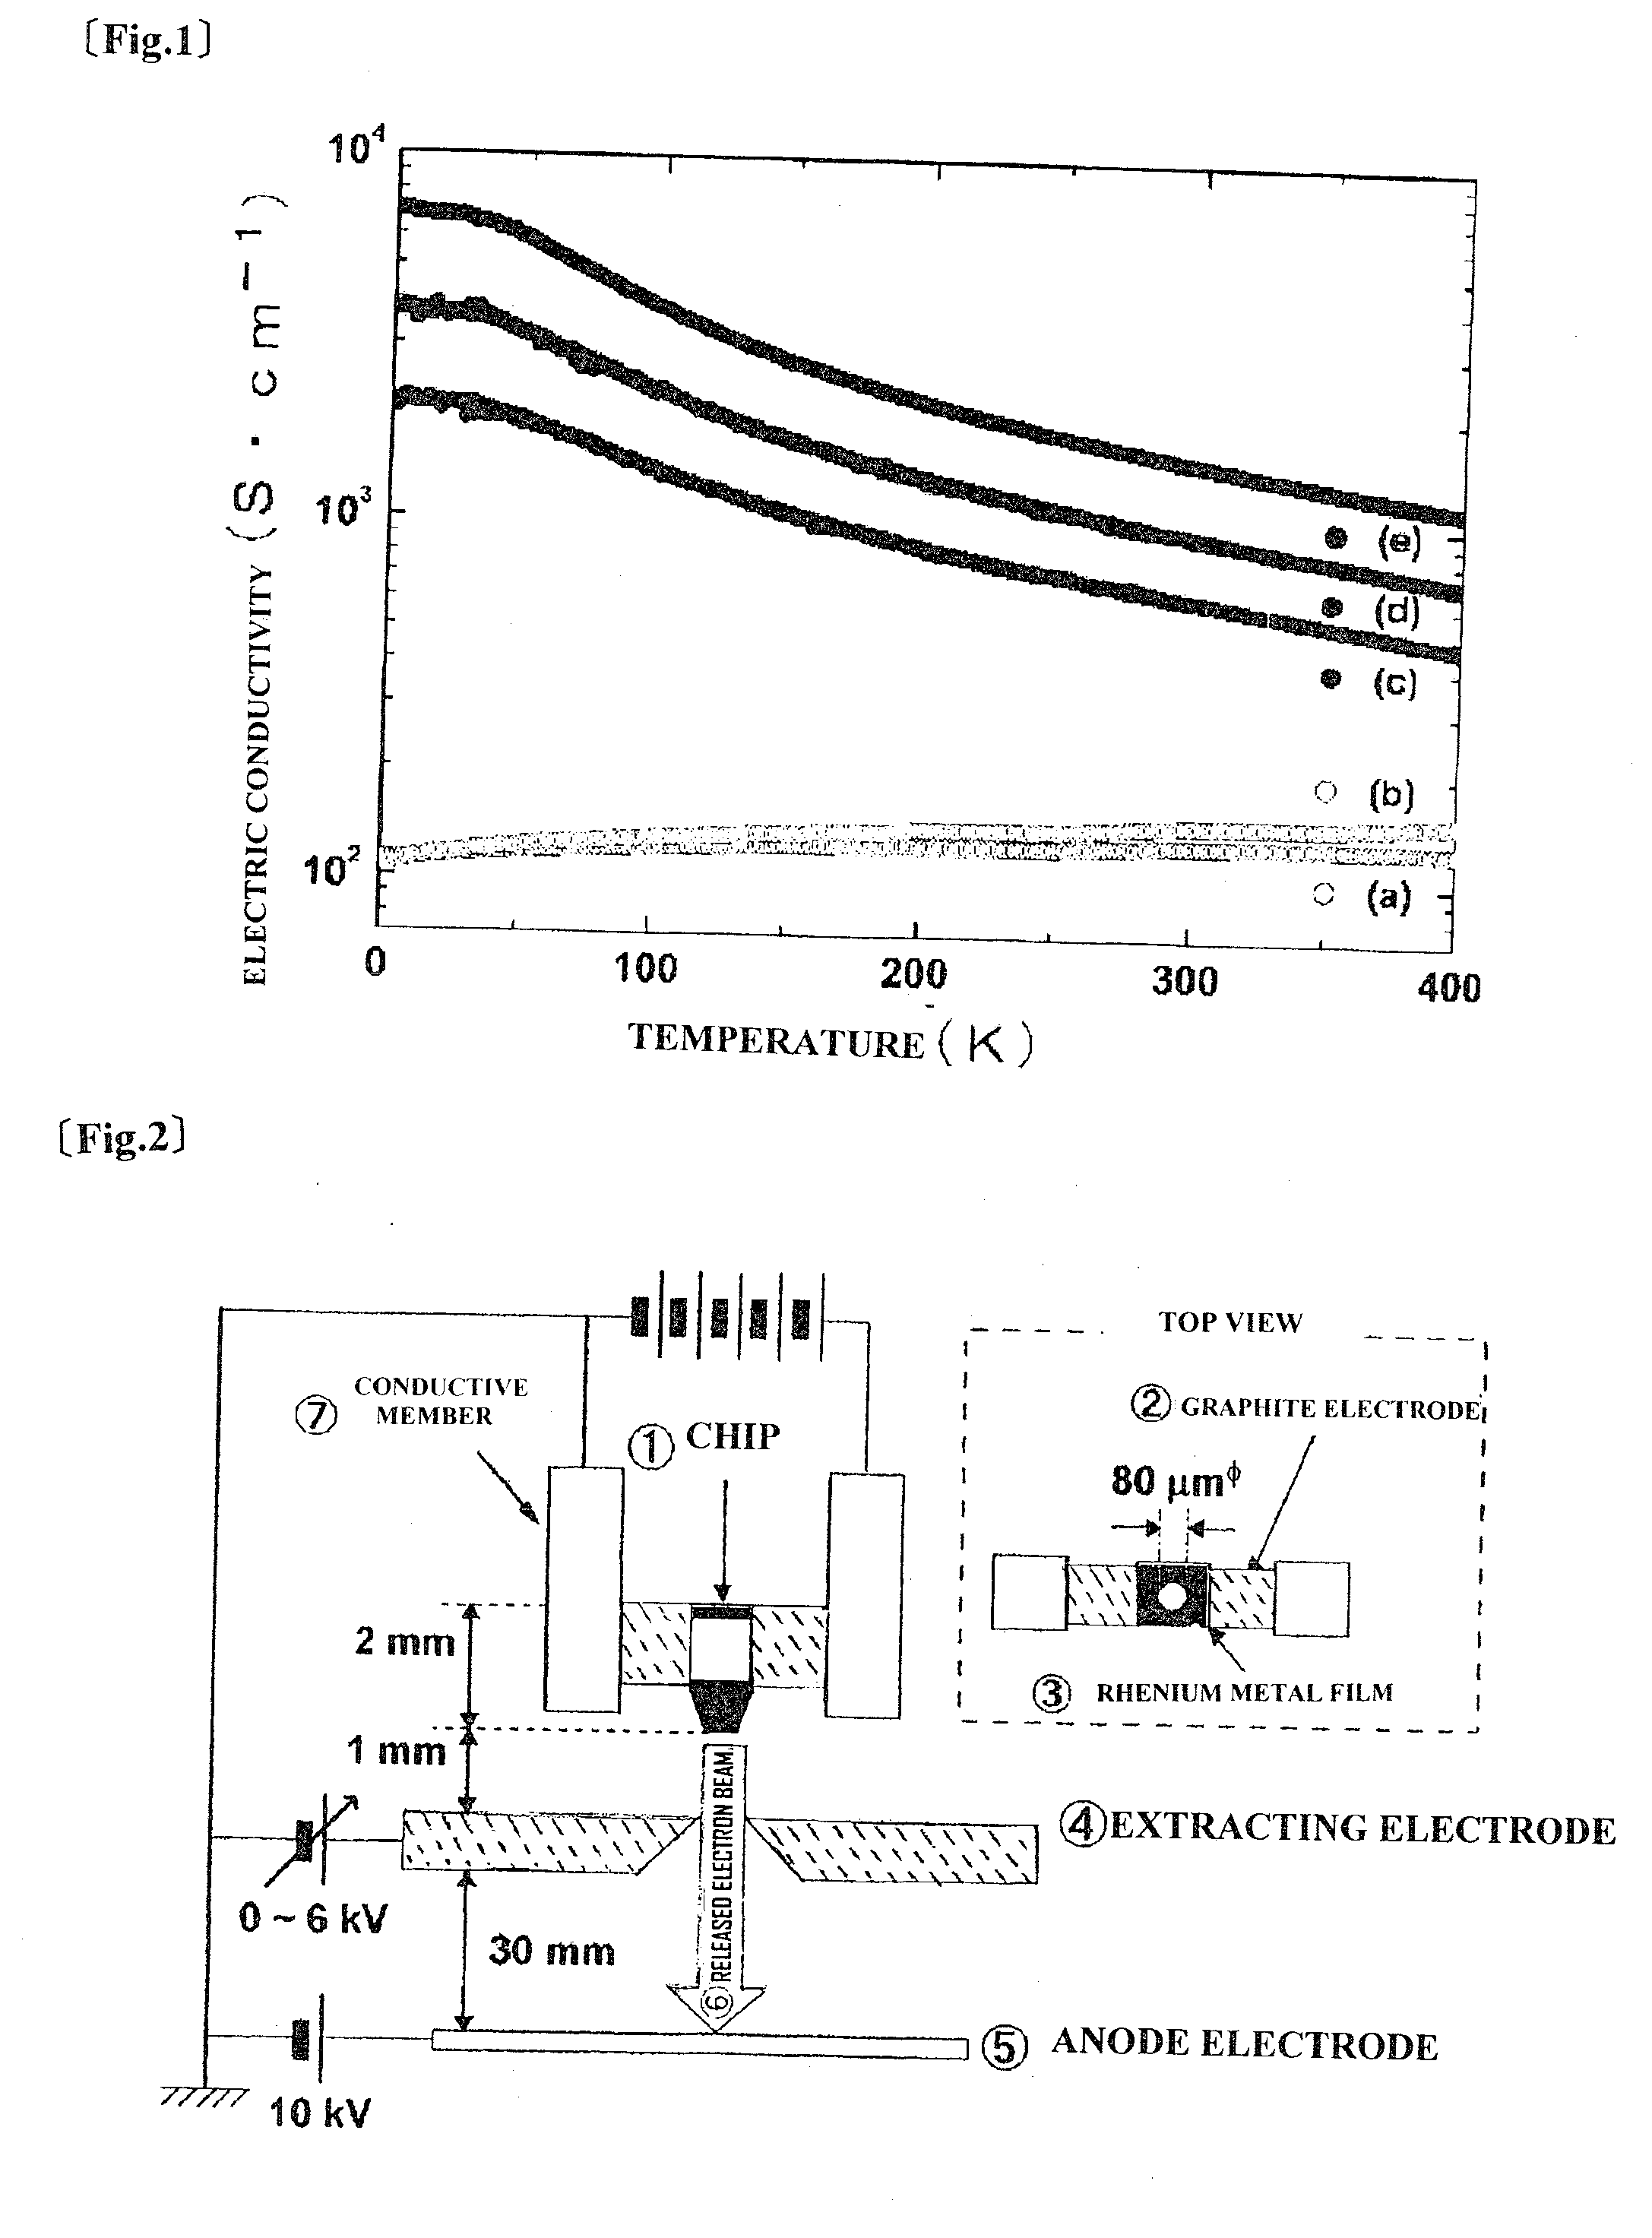 METALLIC ELECTROCONDUCTIVE 12CaO 7Al2O3 COMPOUND AND PROCESS FOR PRODUCING THE SAME